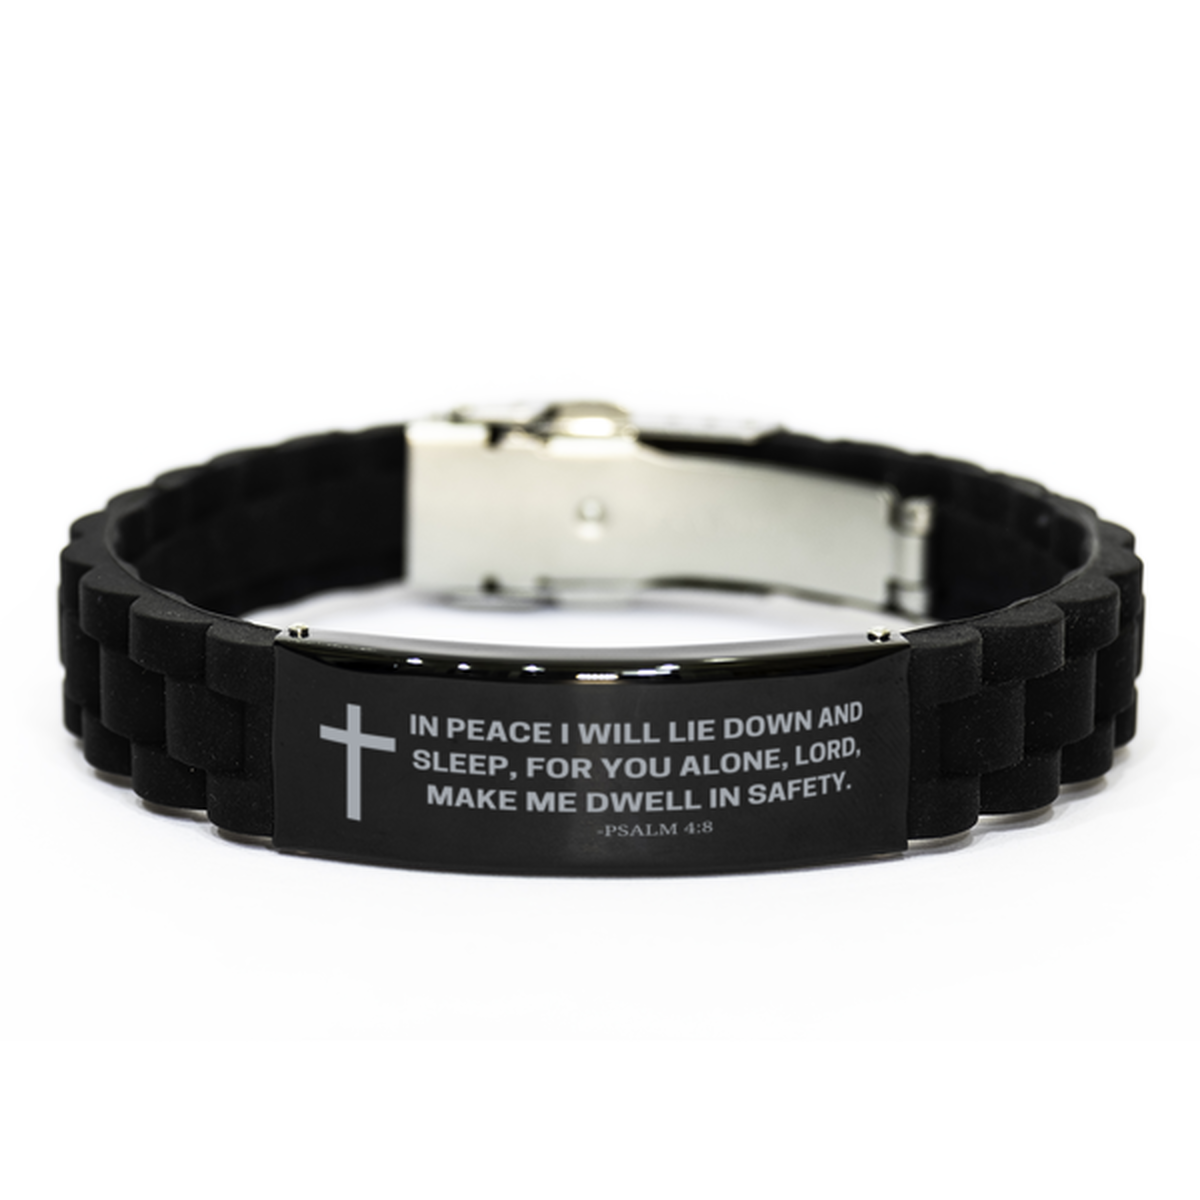 Baptism Gifts For Teenage Boys Girls, Christian Bible Verse Black Glidelock Clasp Bracelet, In peace I will lie down and sleep, Catholic Confirmation Gifts for Son, Godson, Grandson, Nephew